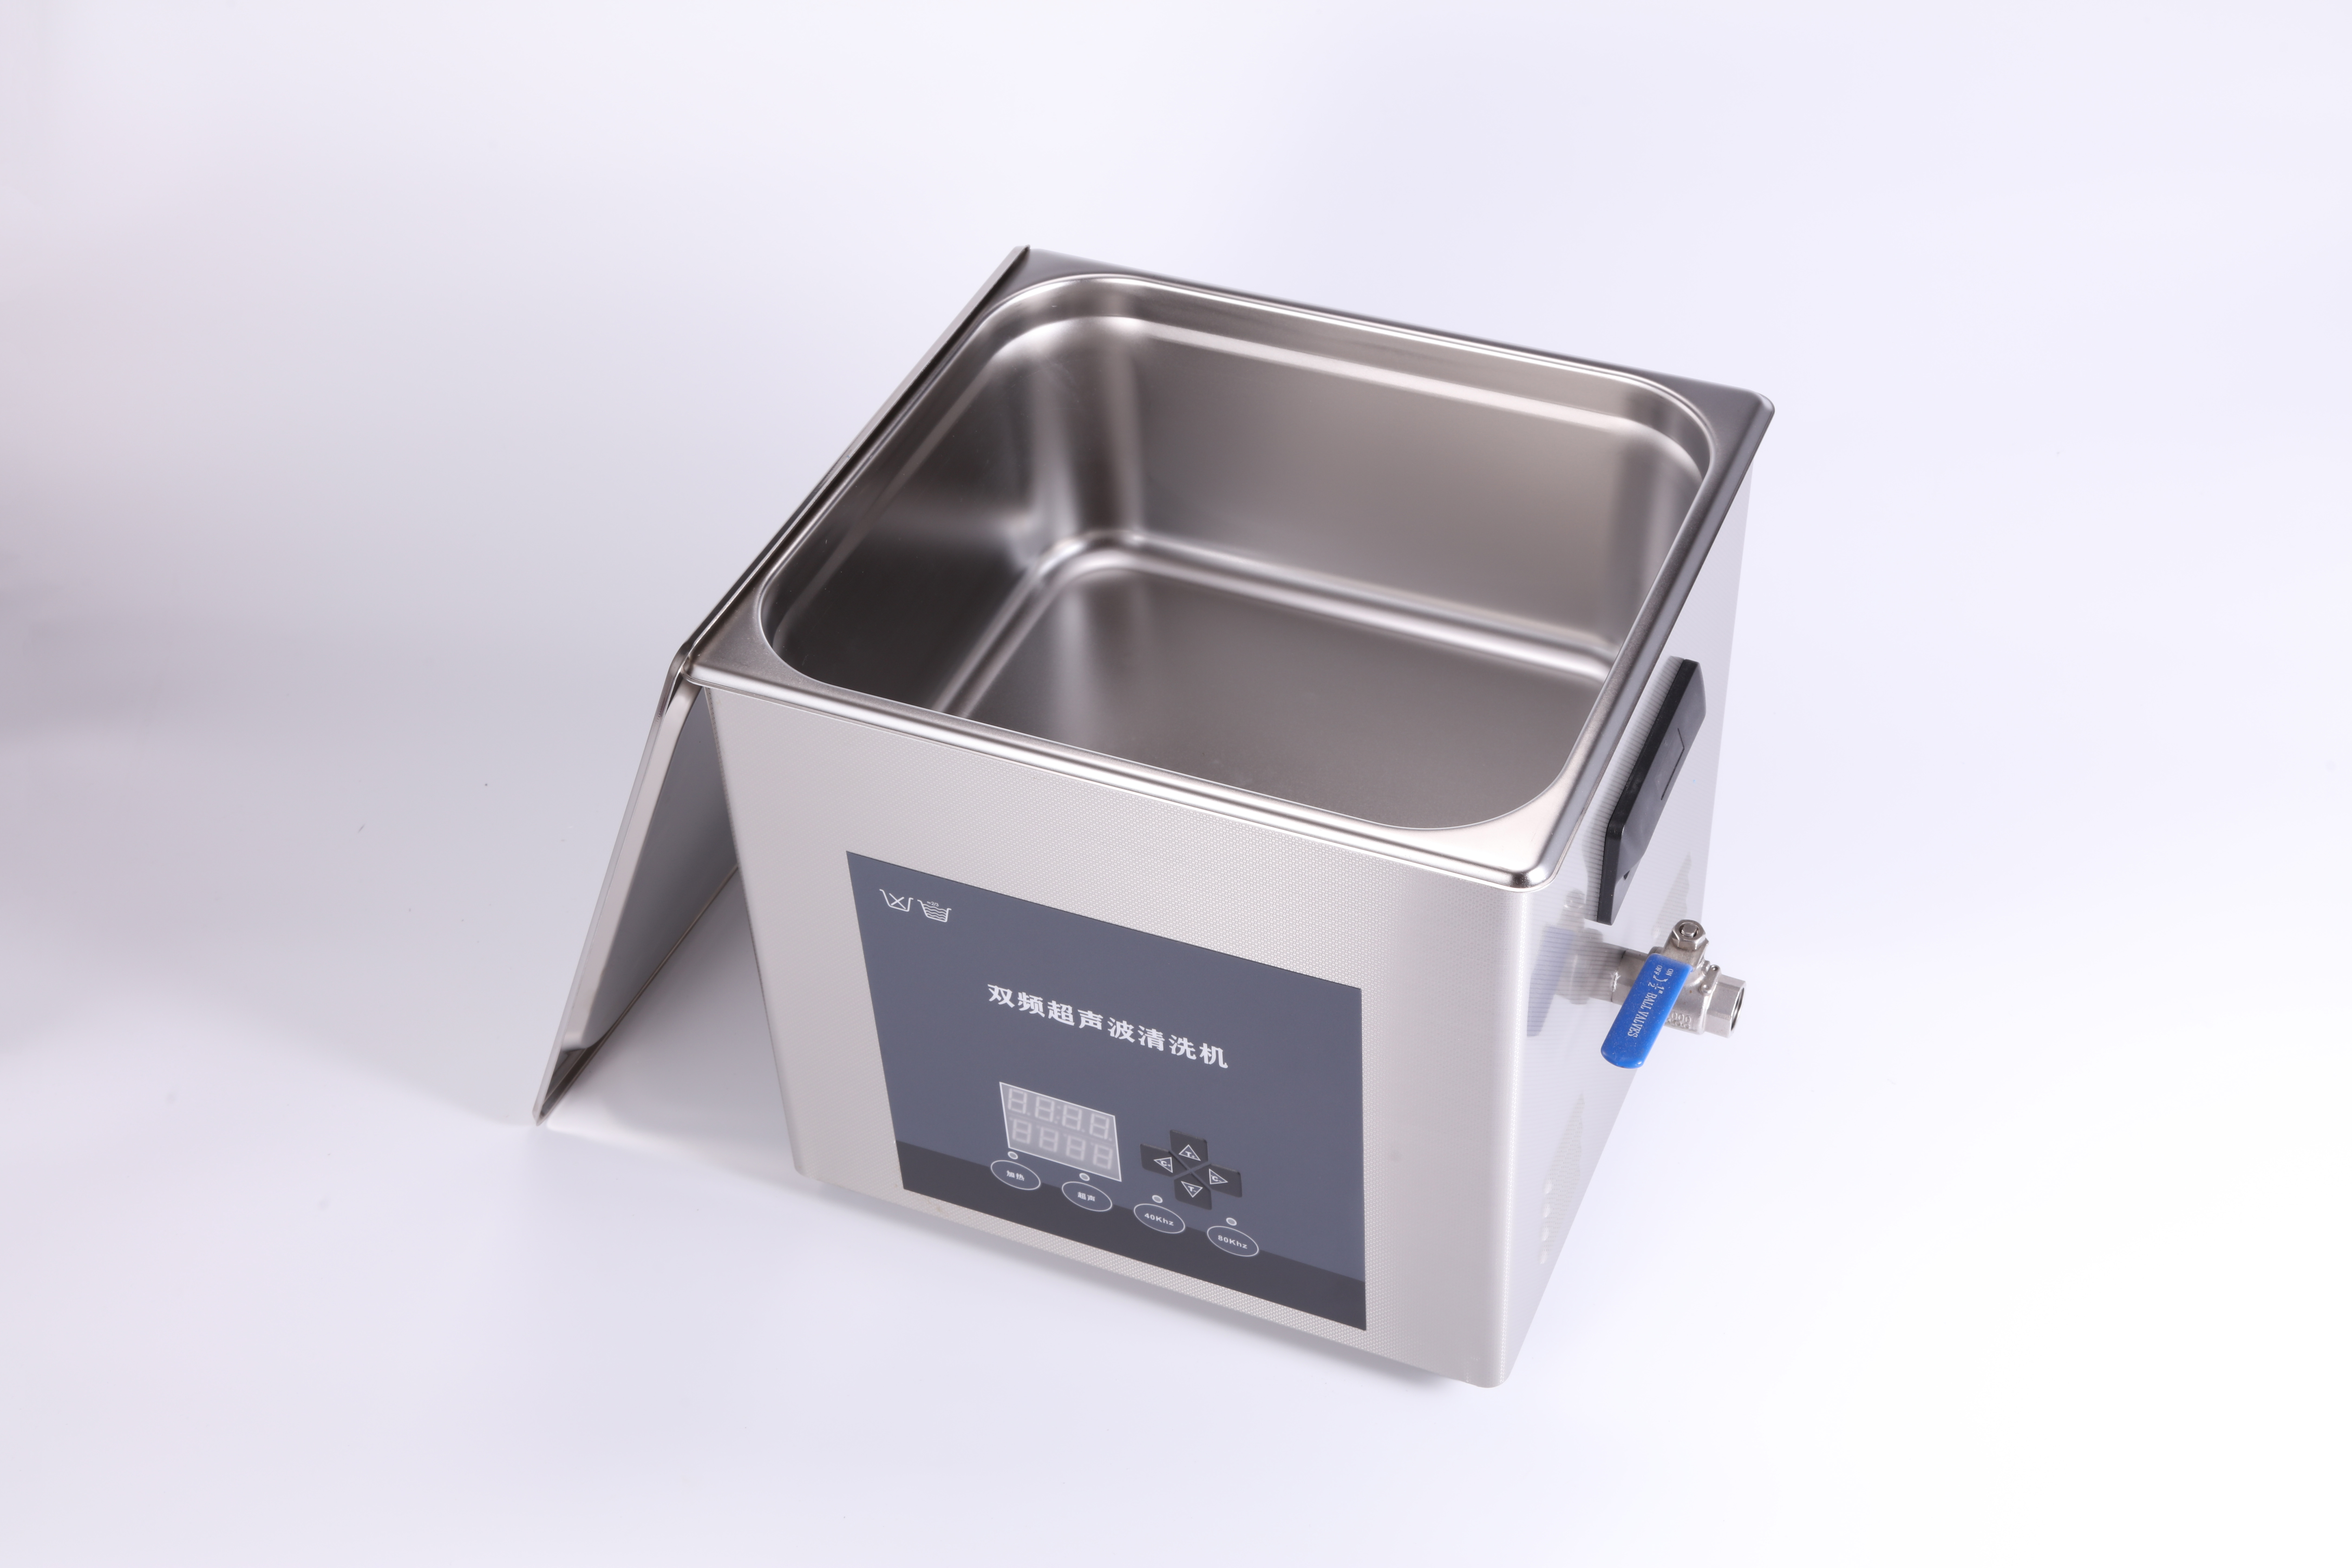 SSD360-15H Dual Frequency Ultrasonic Cleaner 